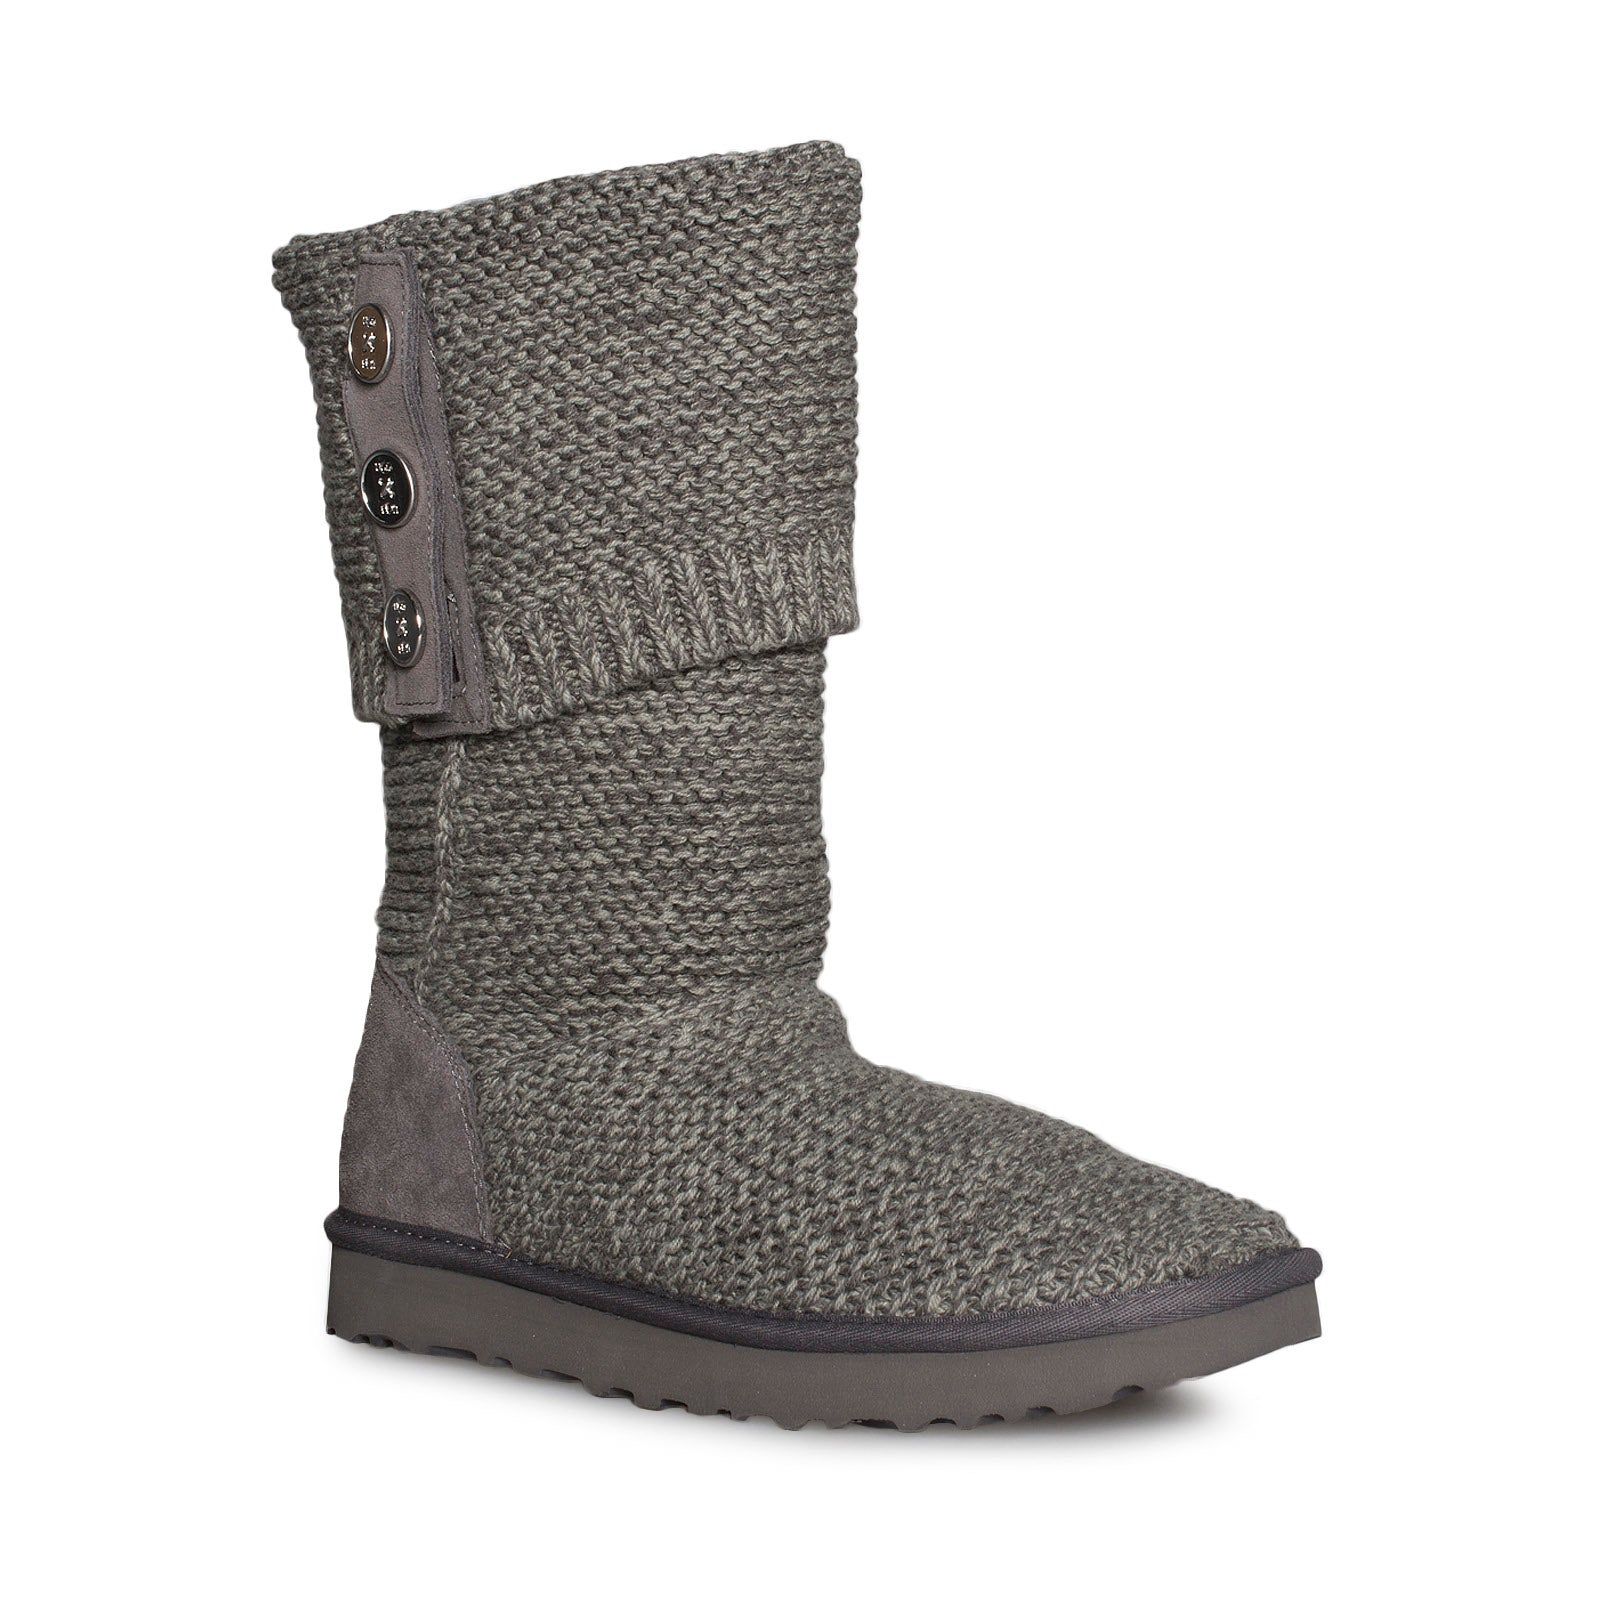 UGG Purl Cardy Knit Charcoal Boots - Women's - MyCozyBoots